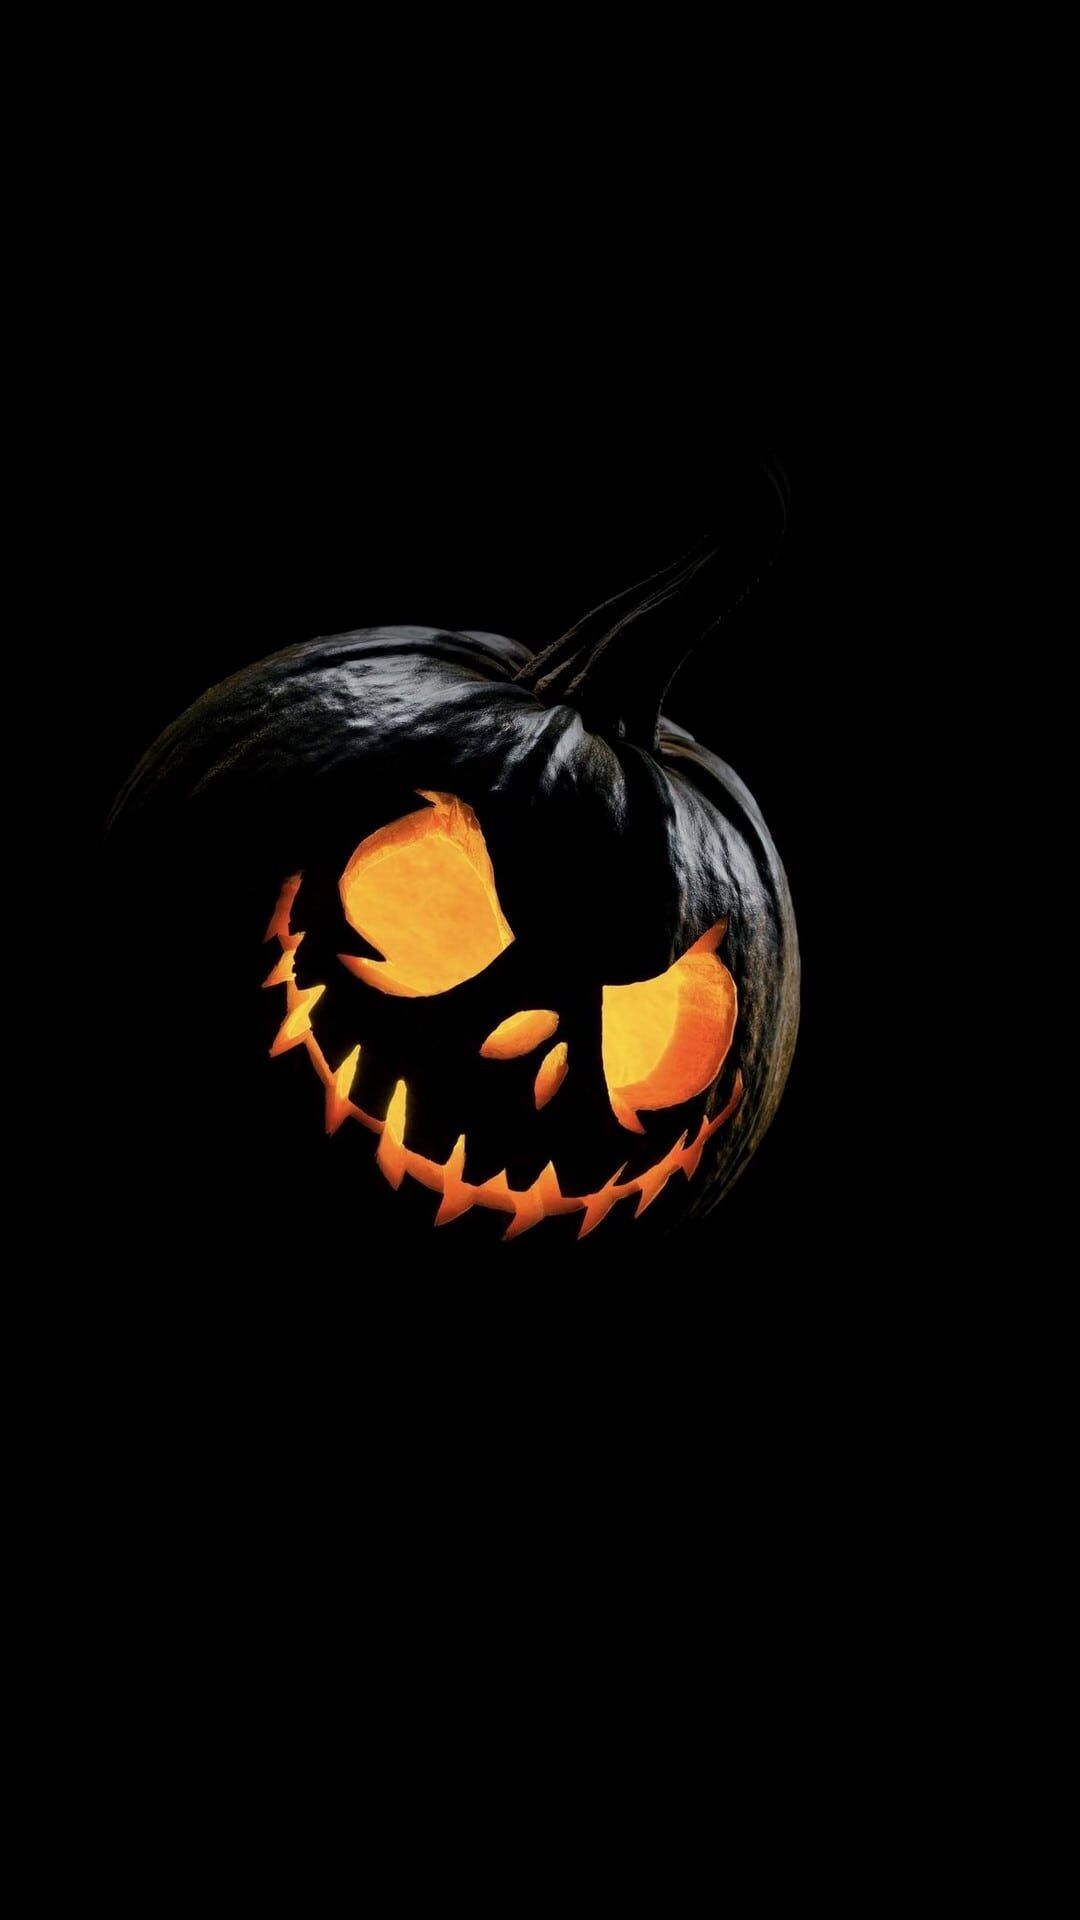 Halloween iPhone wallpaper with high-resolution 1080x1920 pixel. You can use this wallpaper for your iPhone 5, 6, 7, 8, X, XS, XR backgrounds, Mobile Screensaver, or iPad Lock Screen - Spooky